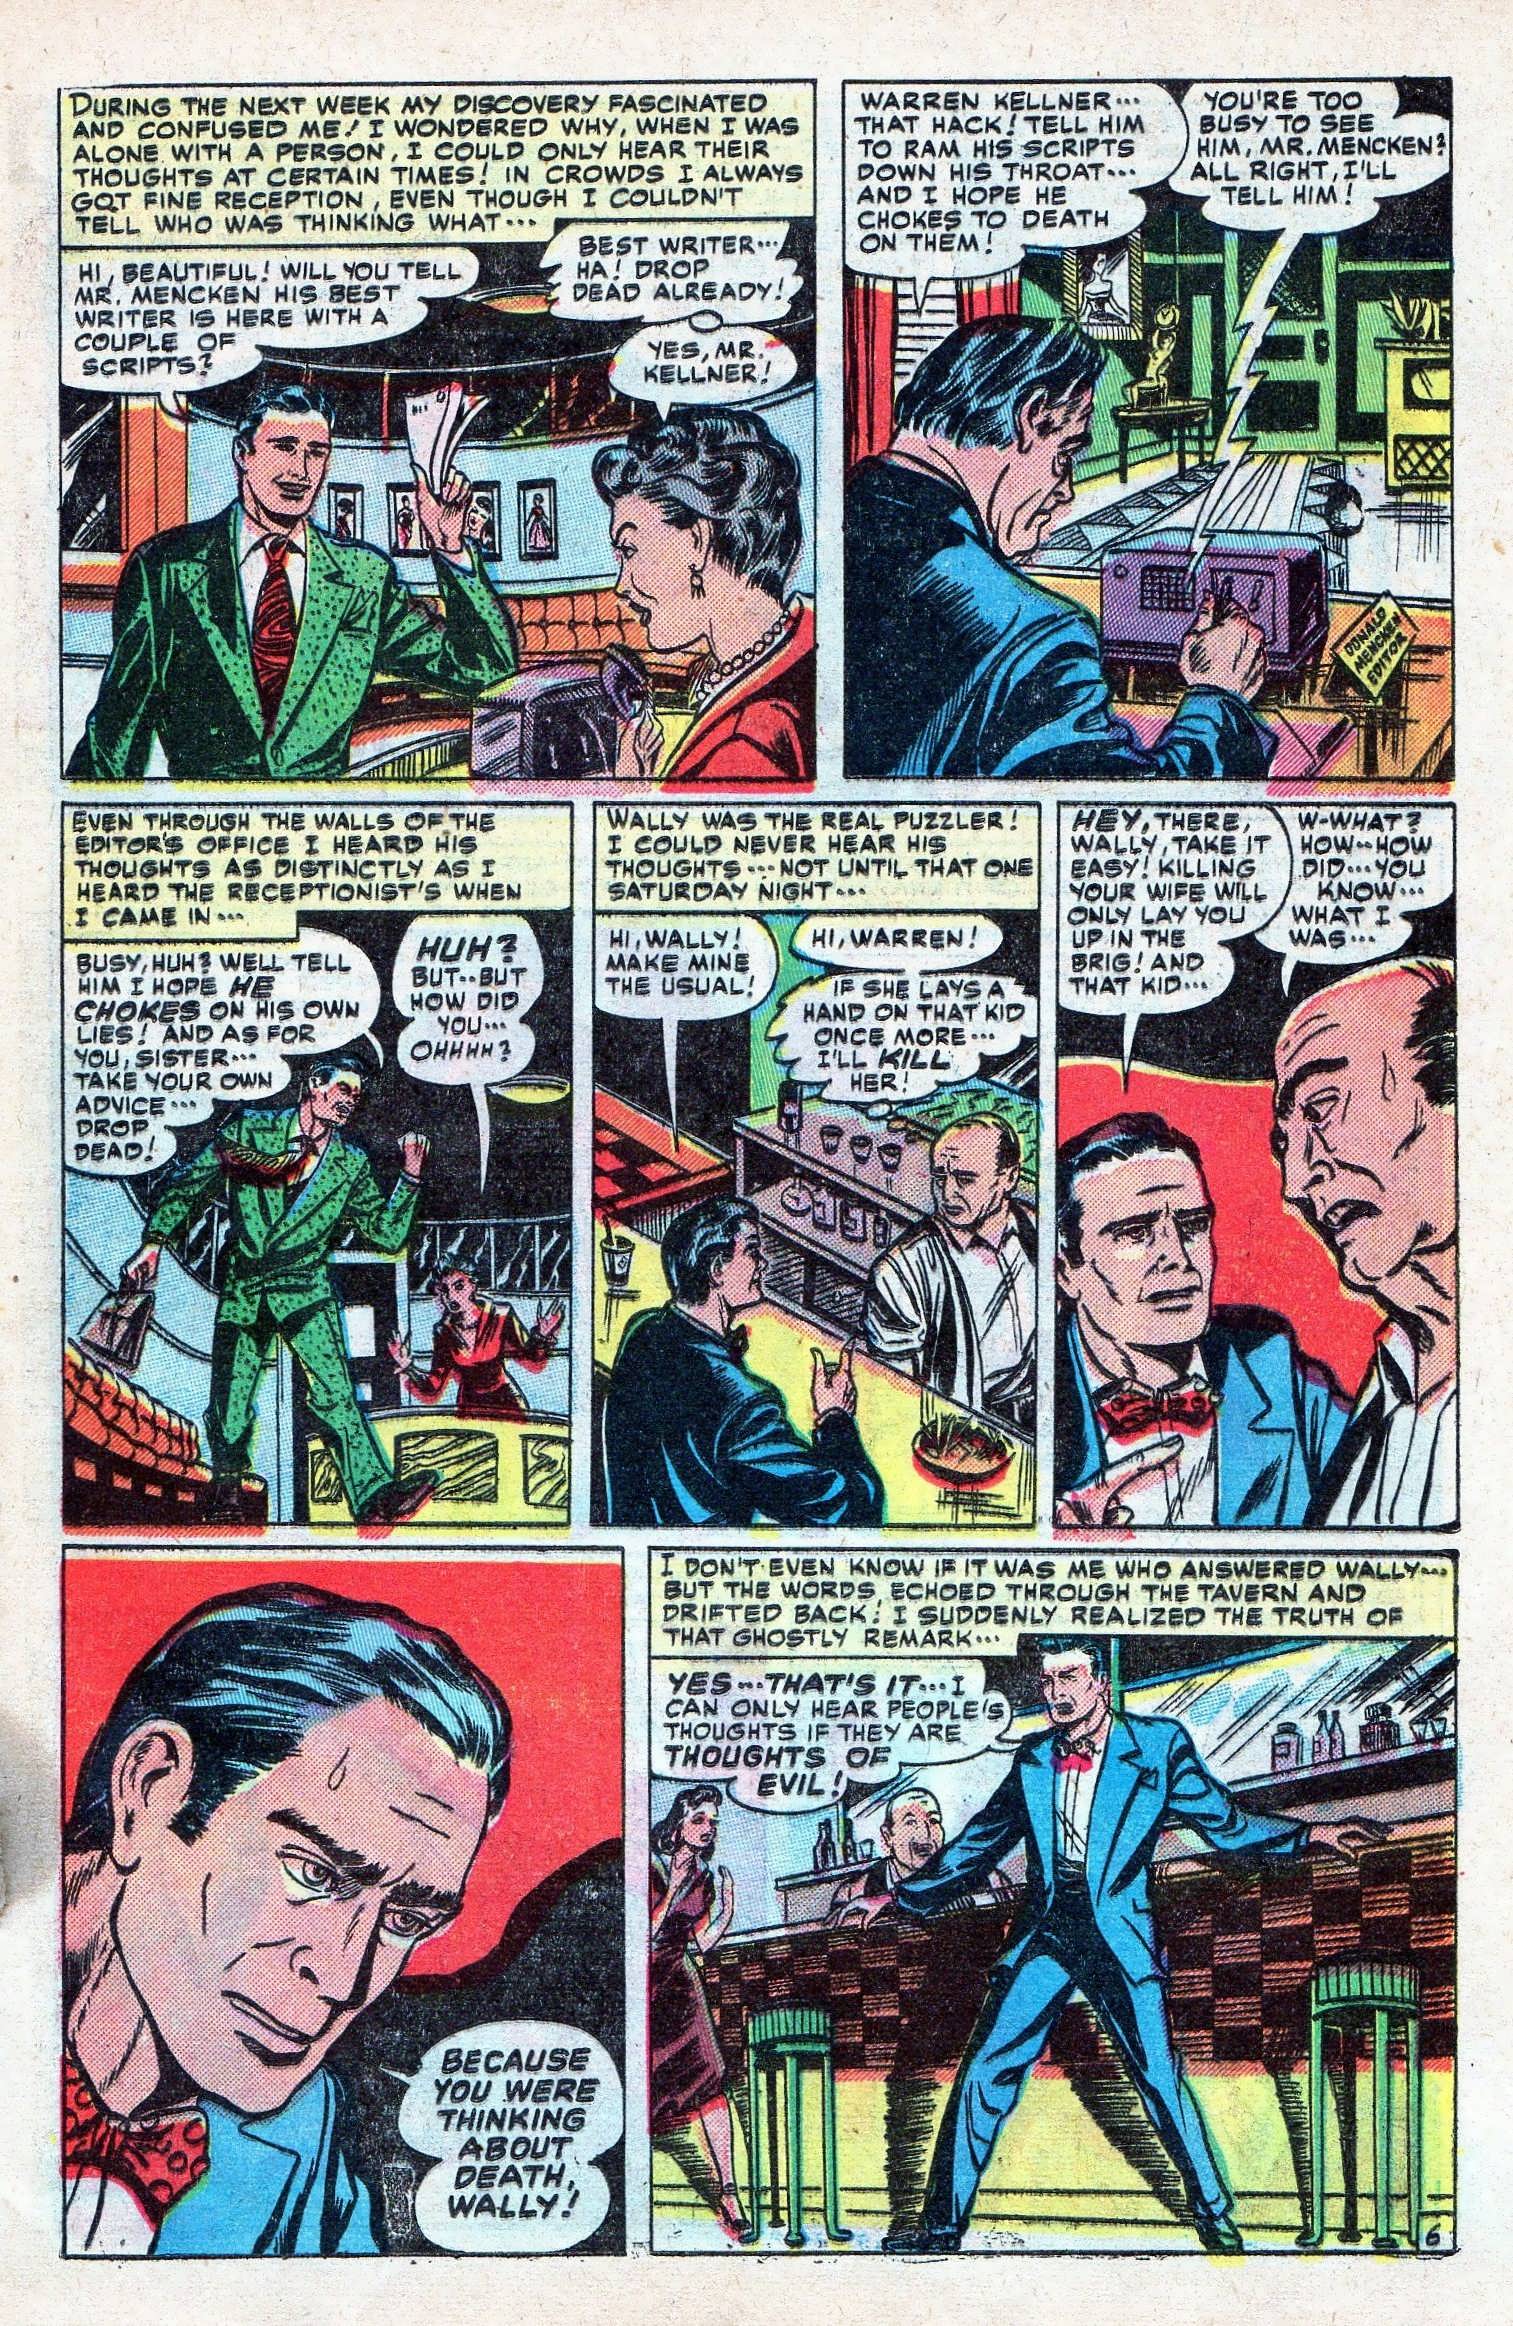 Marvel Tales (1949) 99 Page 24